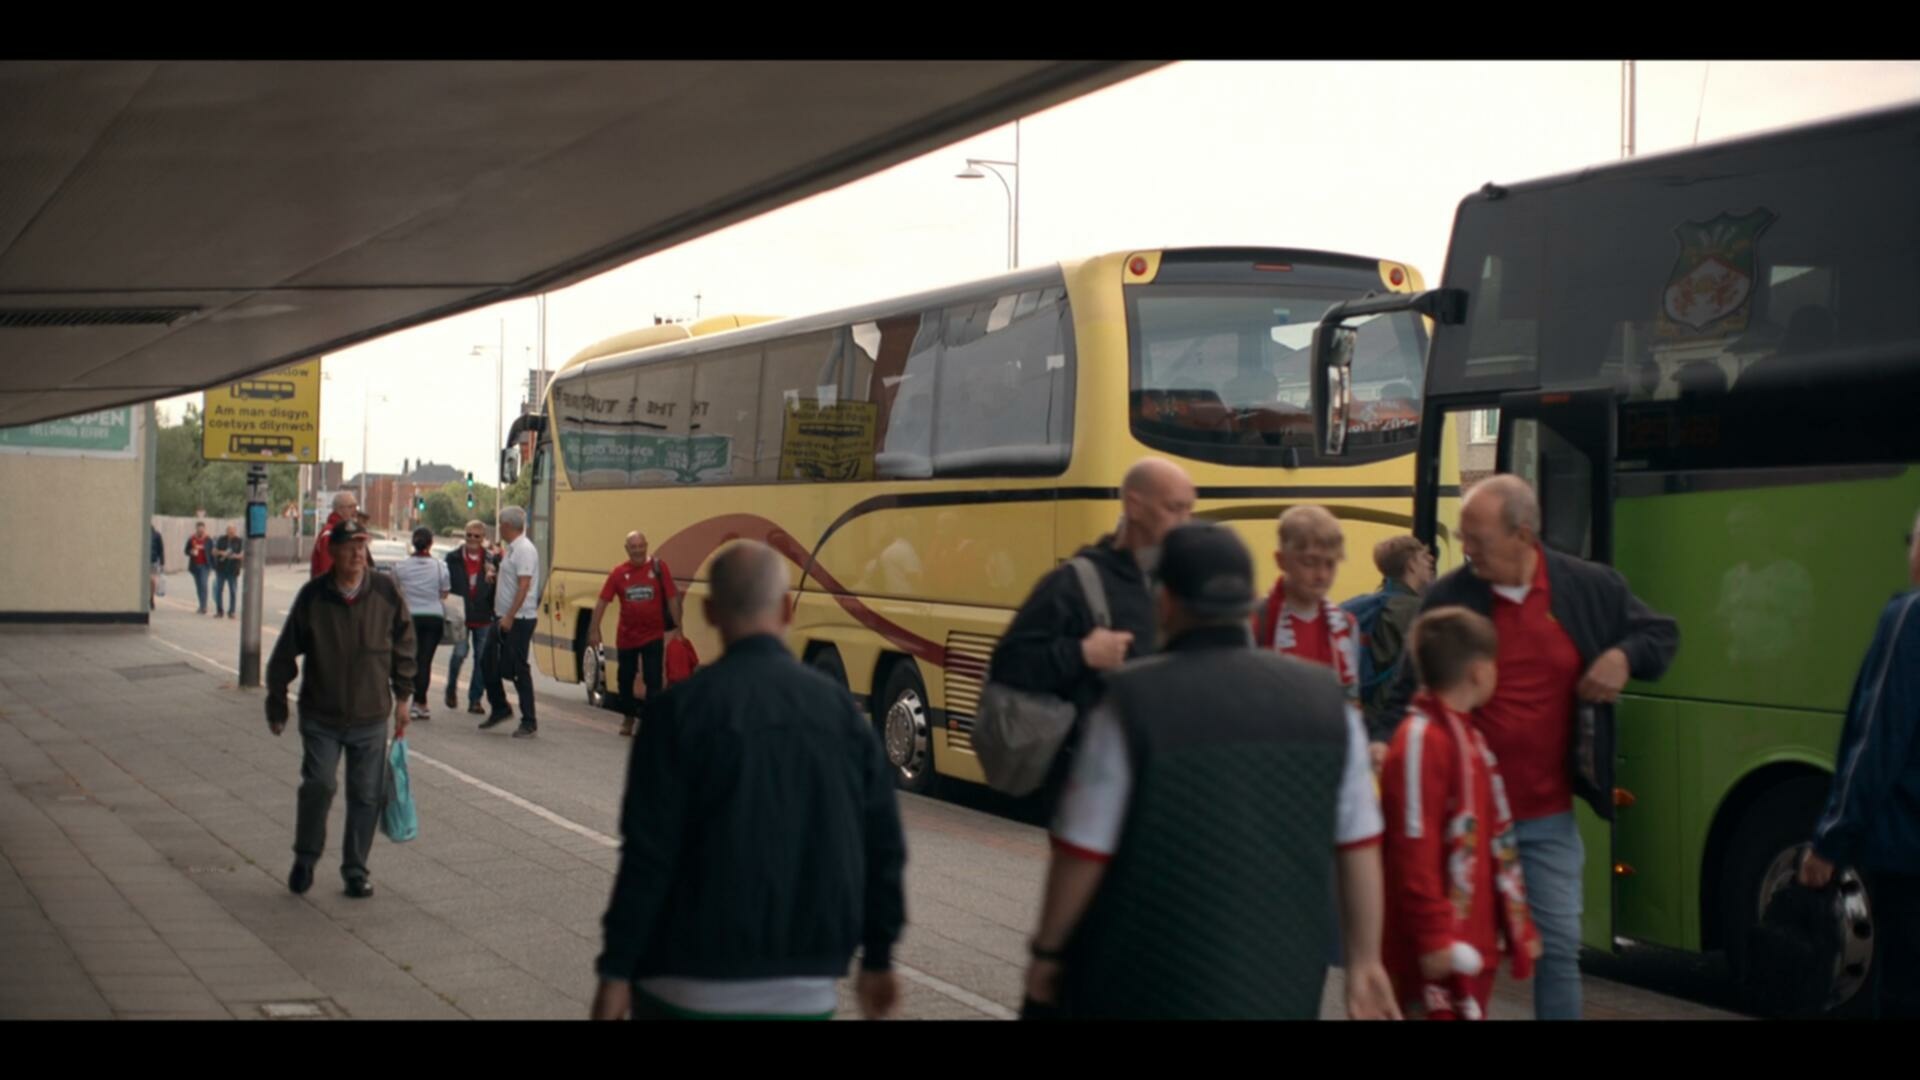 Welcome to Wrexham S02E01 Welcome Back to Wrexham 1080p DSNP WEB DL DDP5 1 H 264 NTb TGx